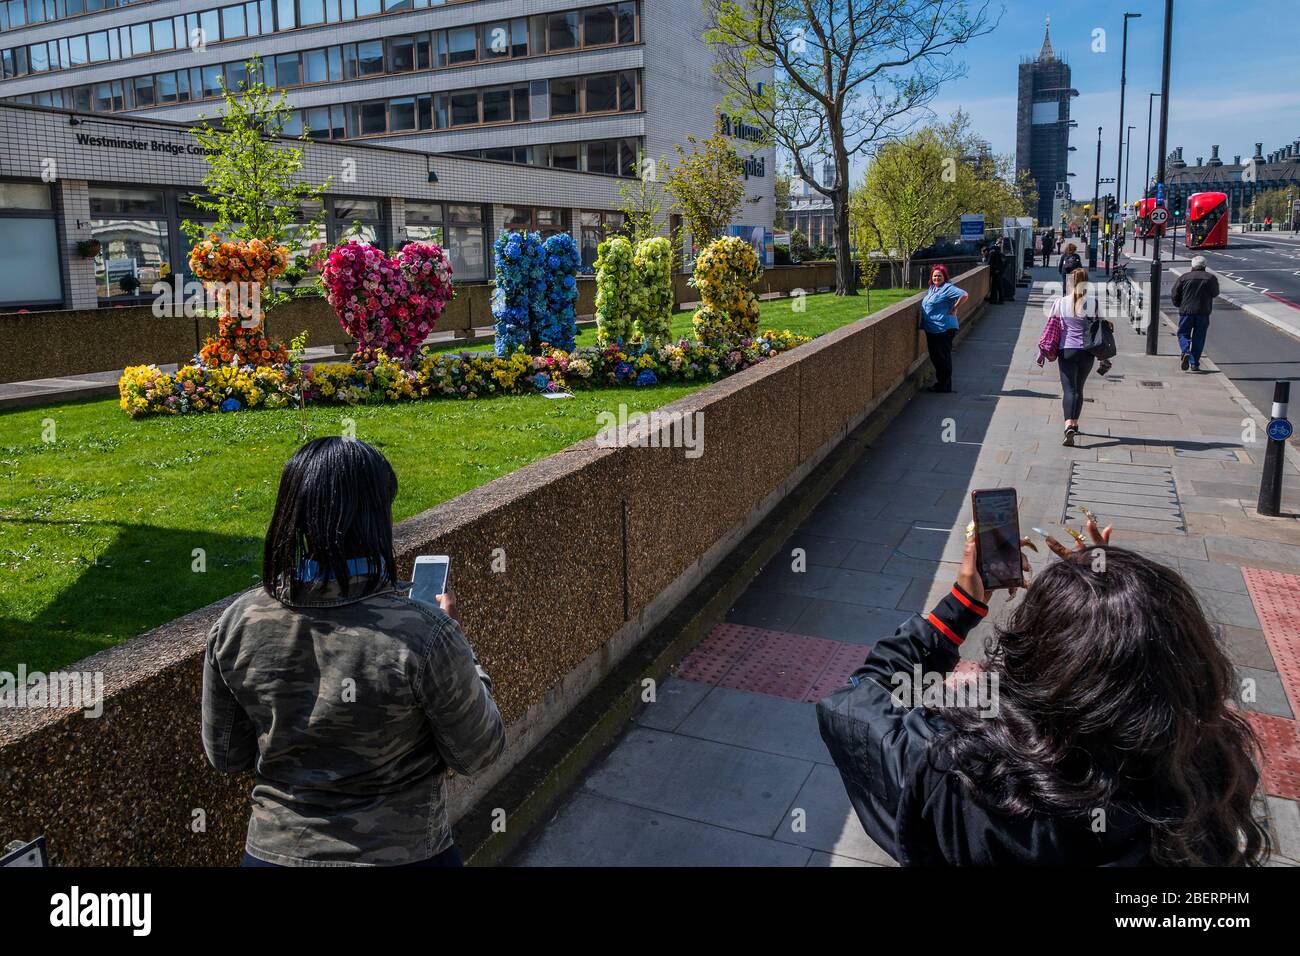 London, UK. 15th Apr, 2020. Passers by admire and photograph a floral Tribute, which spells 'I Love (heart) NHS', outside St Thomas' Hospital - The 'lockdown' continues in London because of the Coronavirus (Covid 19) outbreak. Credit: Guy Bell/Alamy Live News Stock Photo